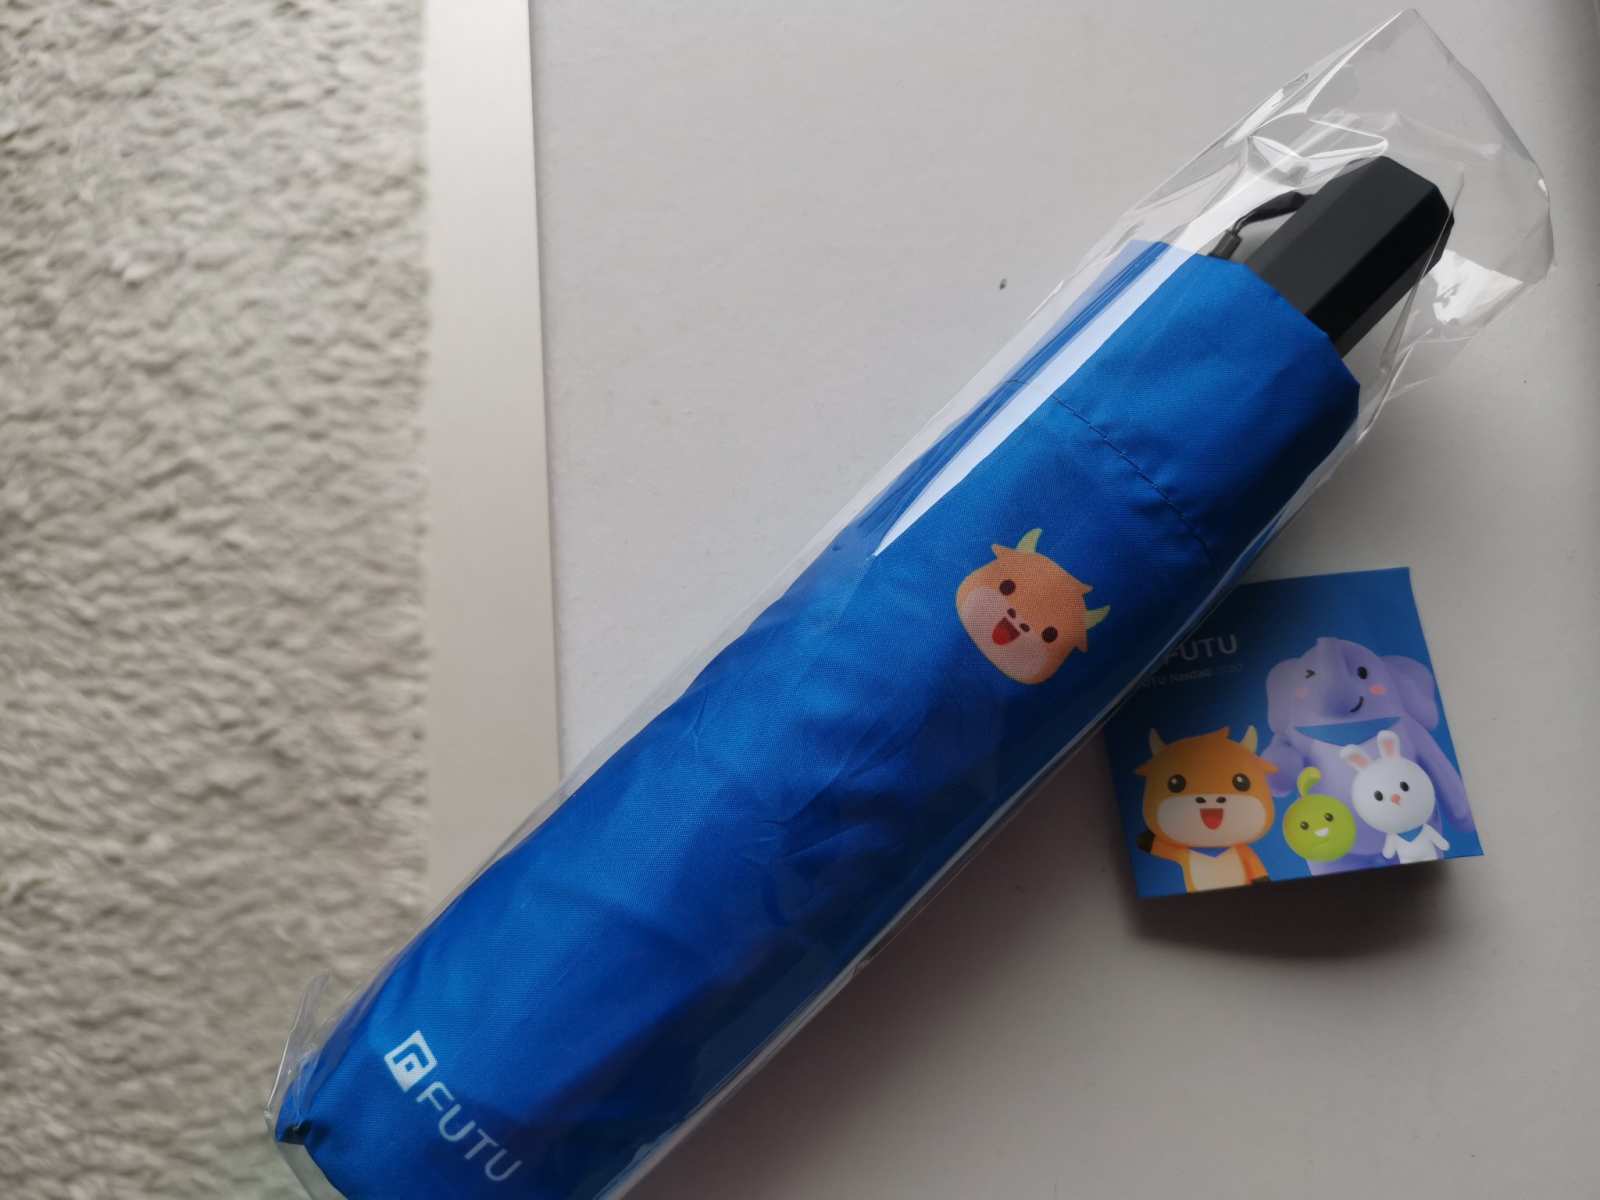 What a coincidence! MooMoo umbrella was arrived in a rainy day (the last day of 2021)